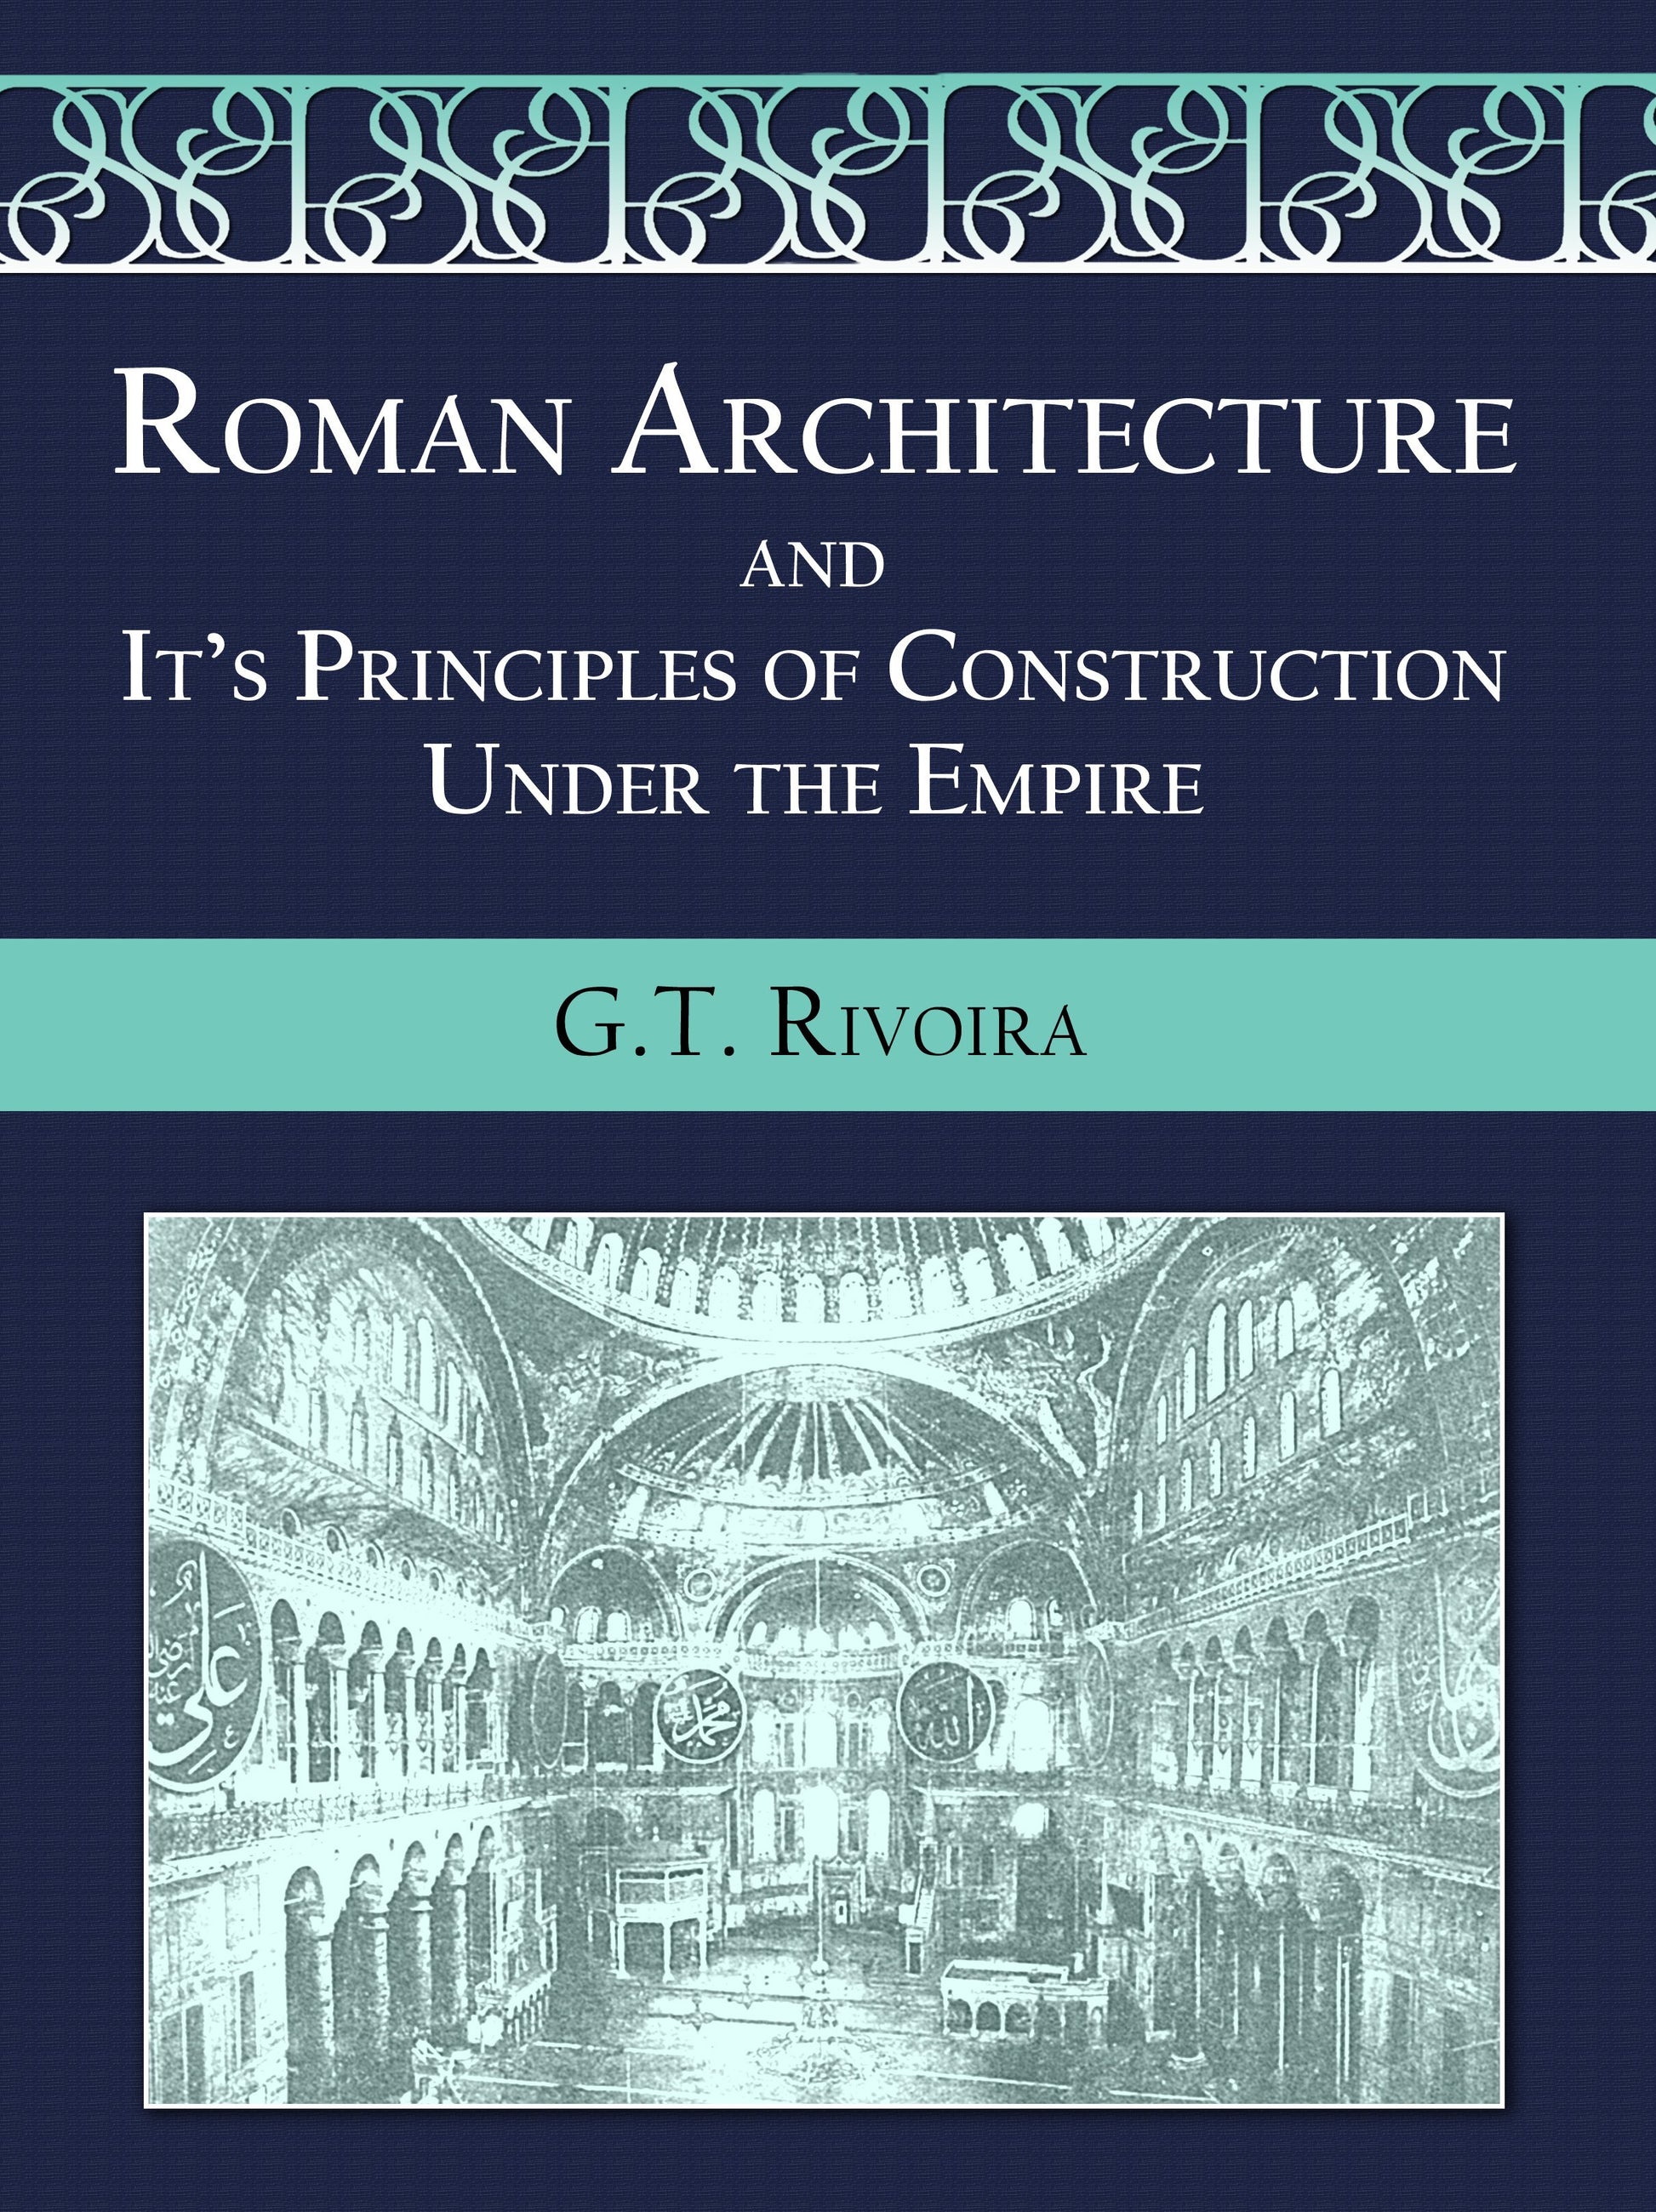 Roman Architecture and Its Principles of Construction Under the Empire